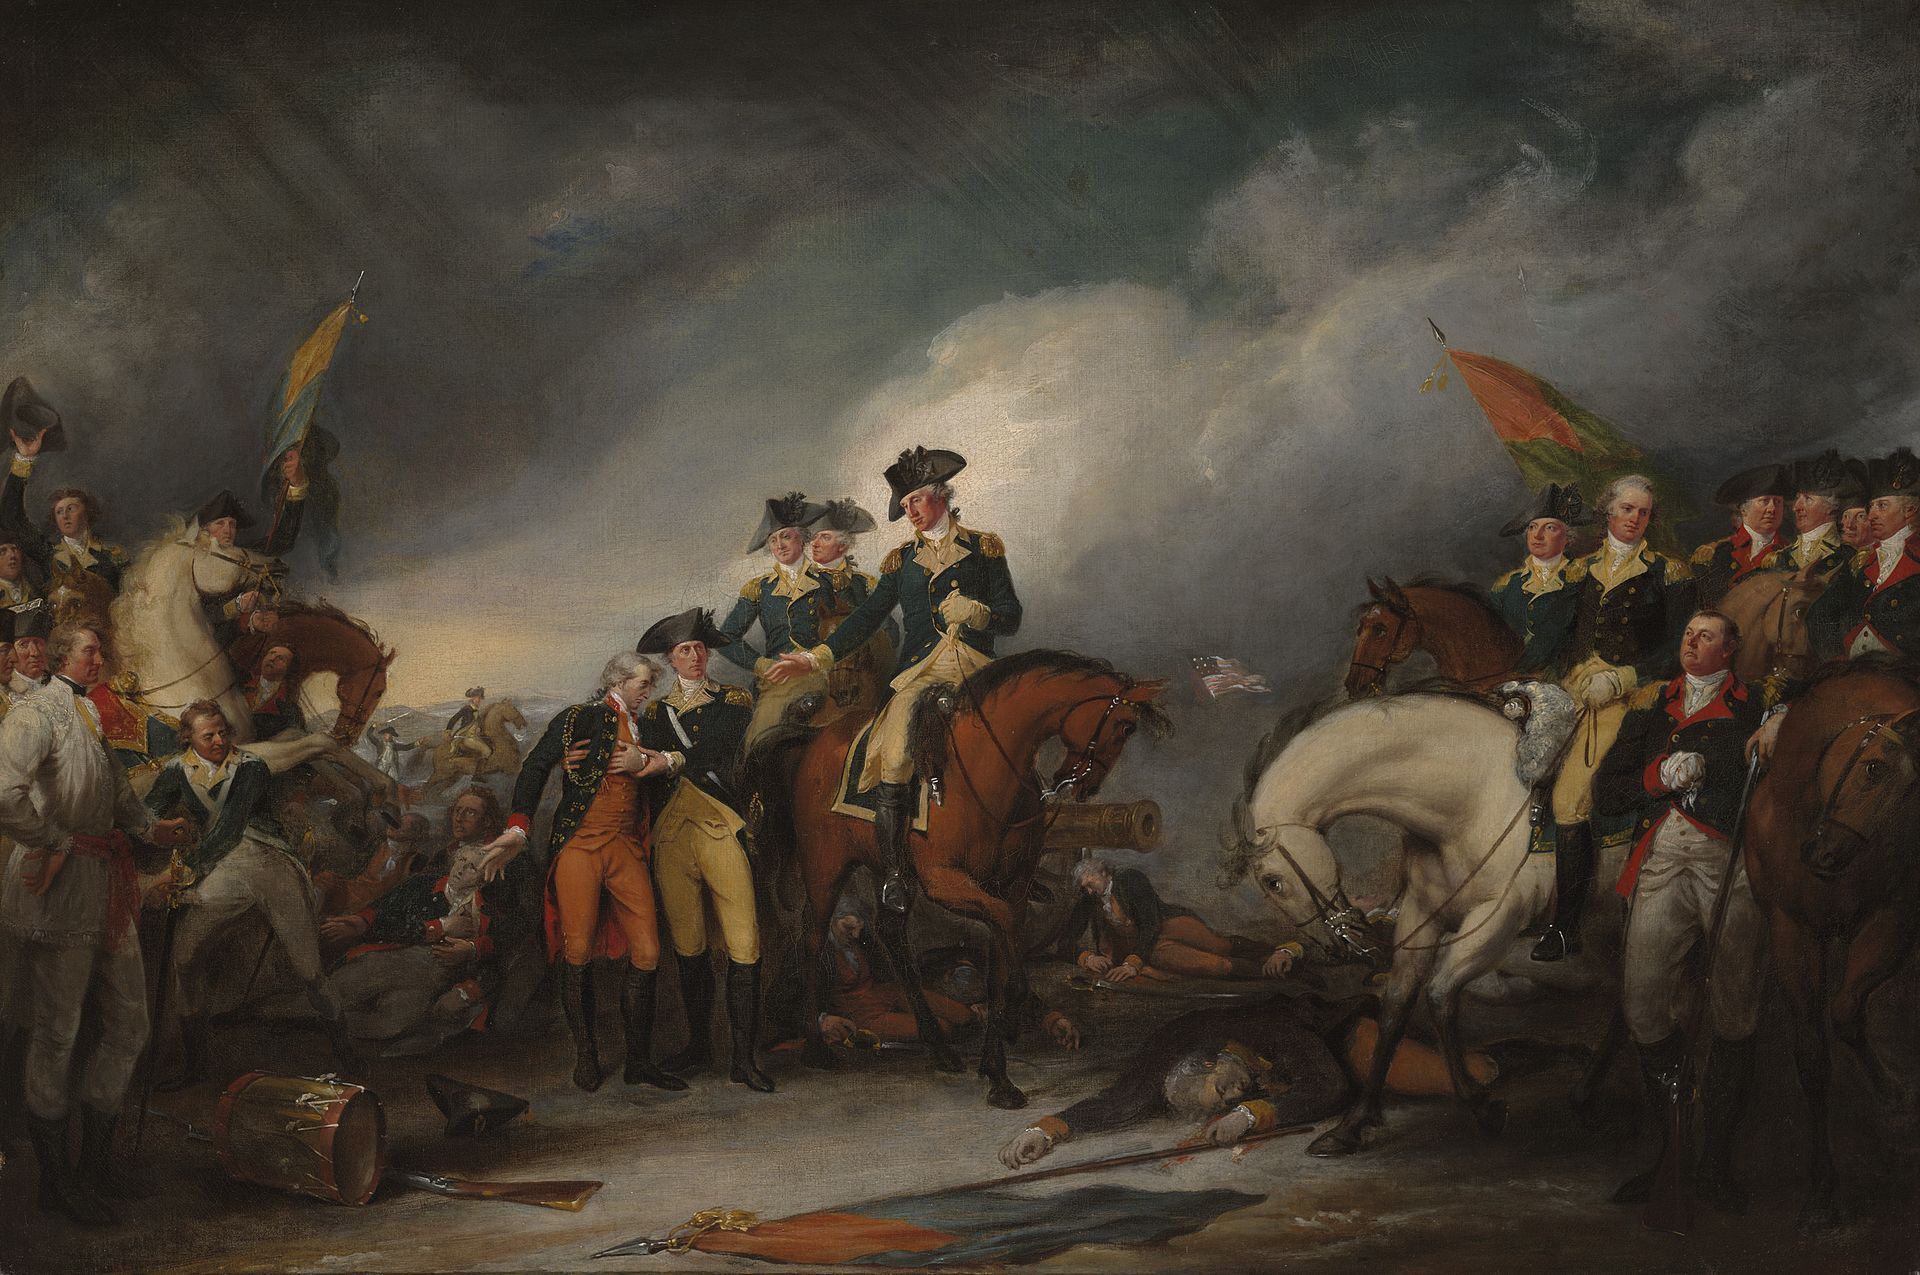 The Capture of the Hessians at Trenton, December 26, 1776 by John Trumbull